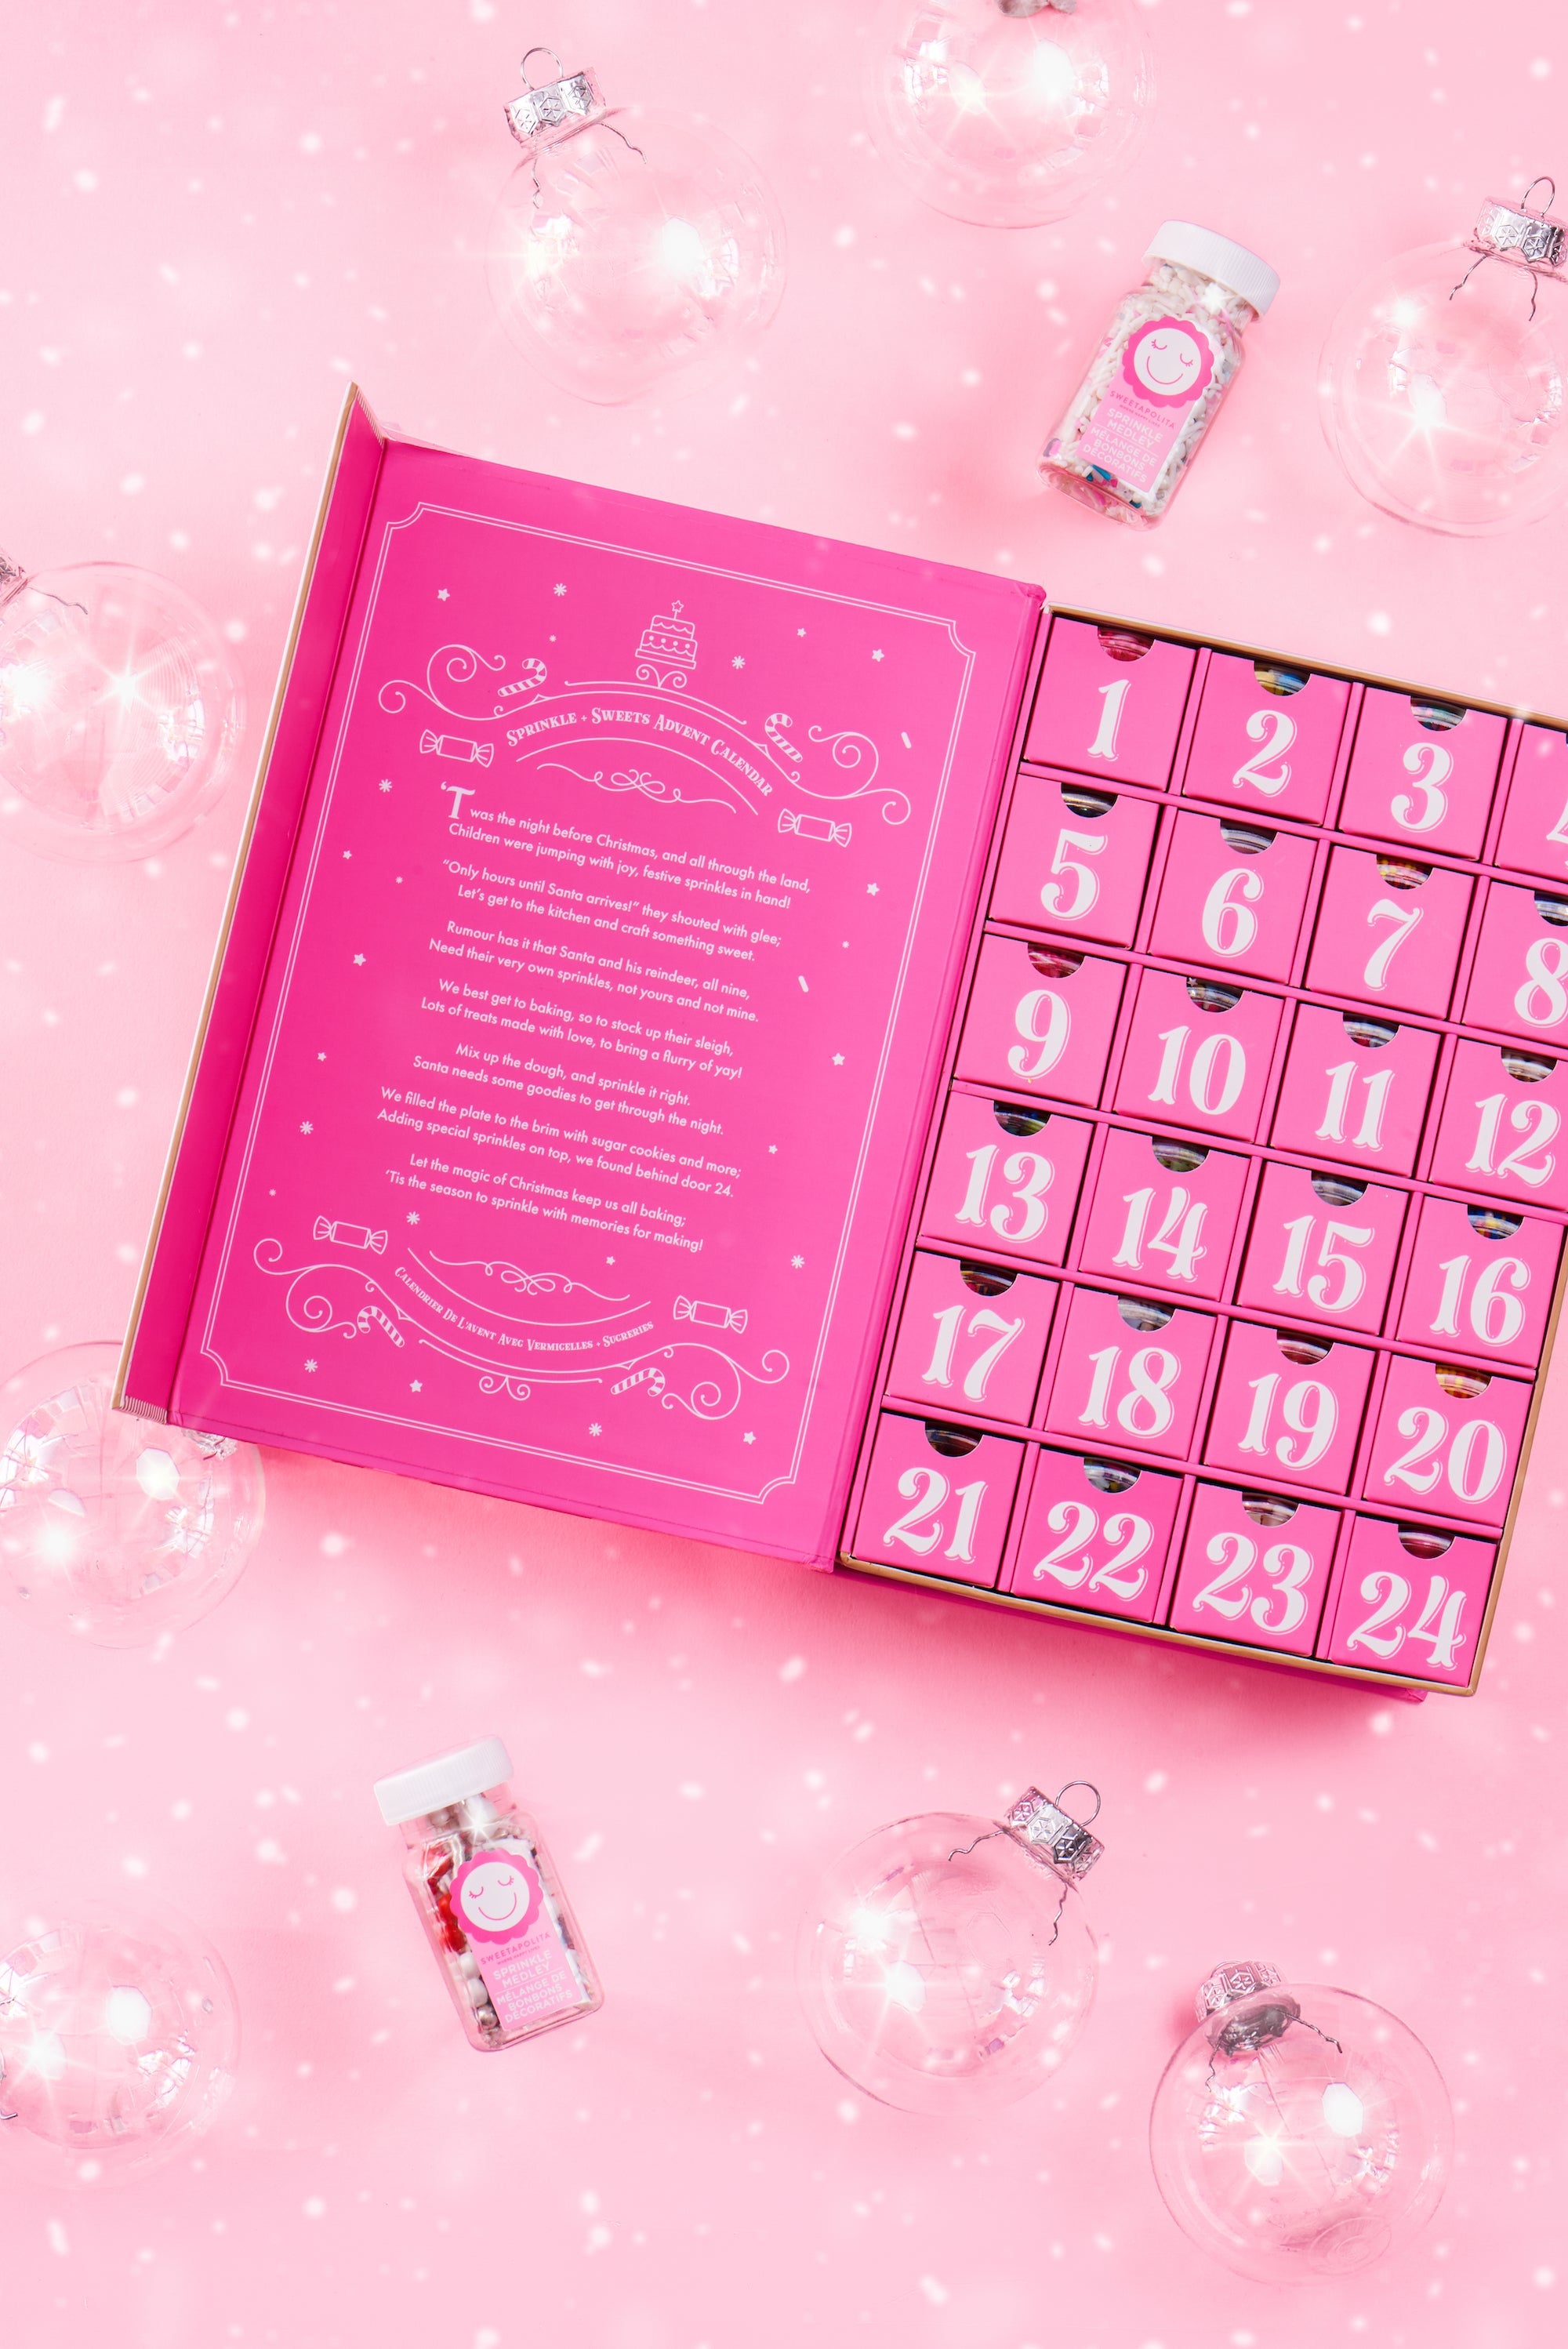 Advent Calendar - 24 Magical Days of Sprinkles and Sweets - US